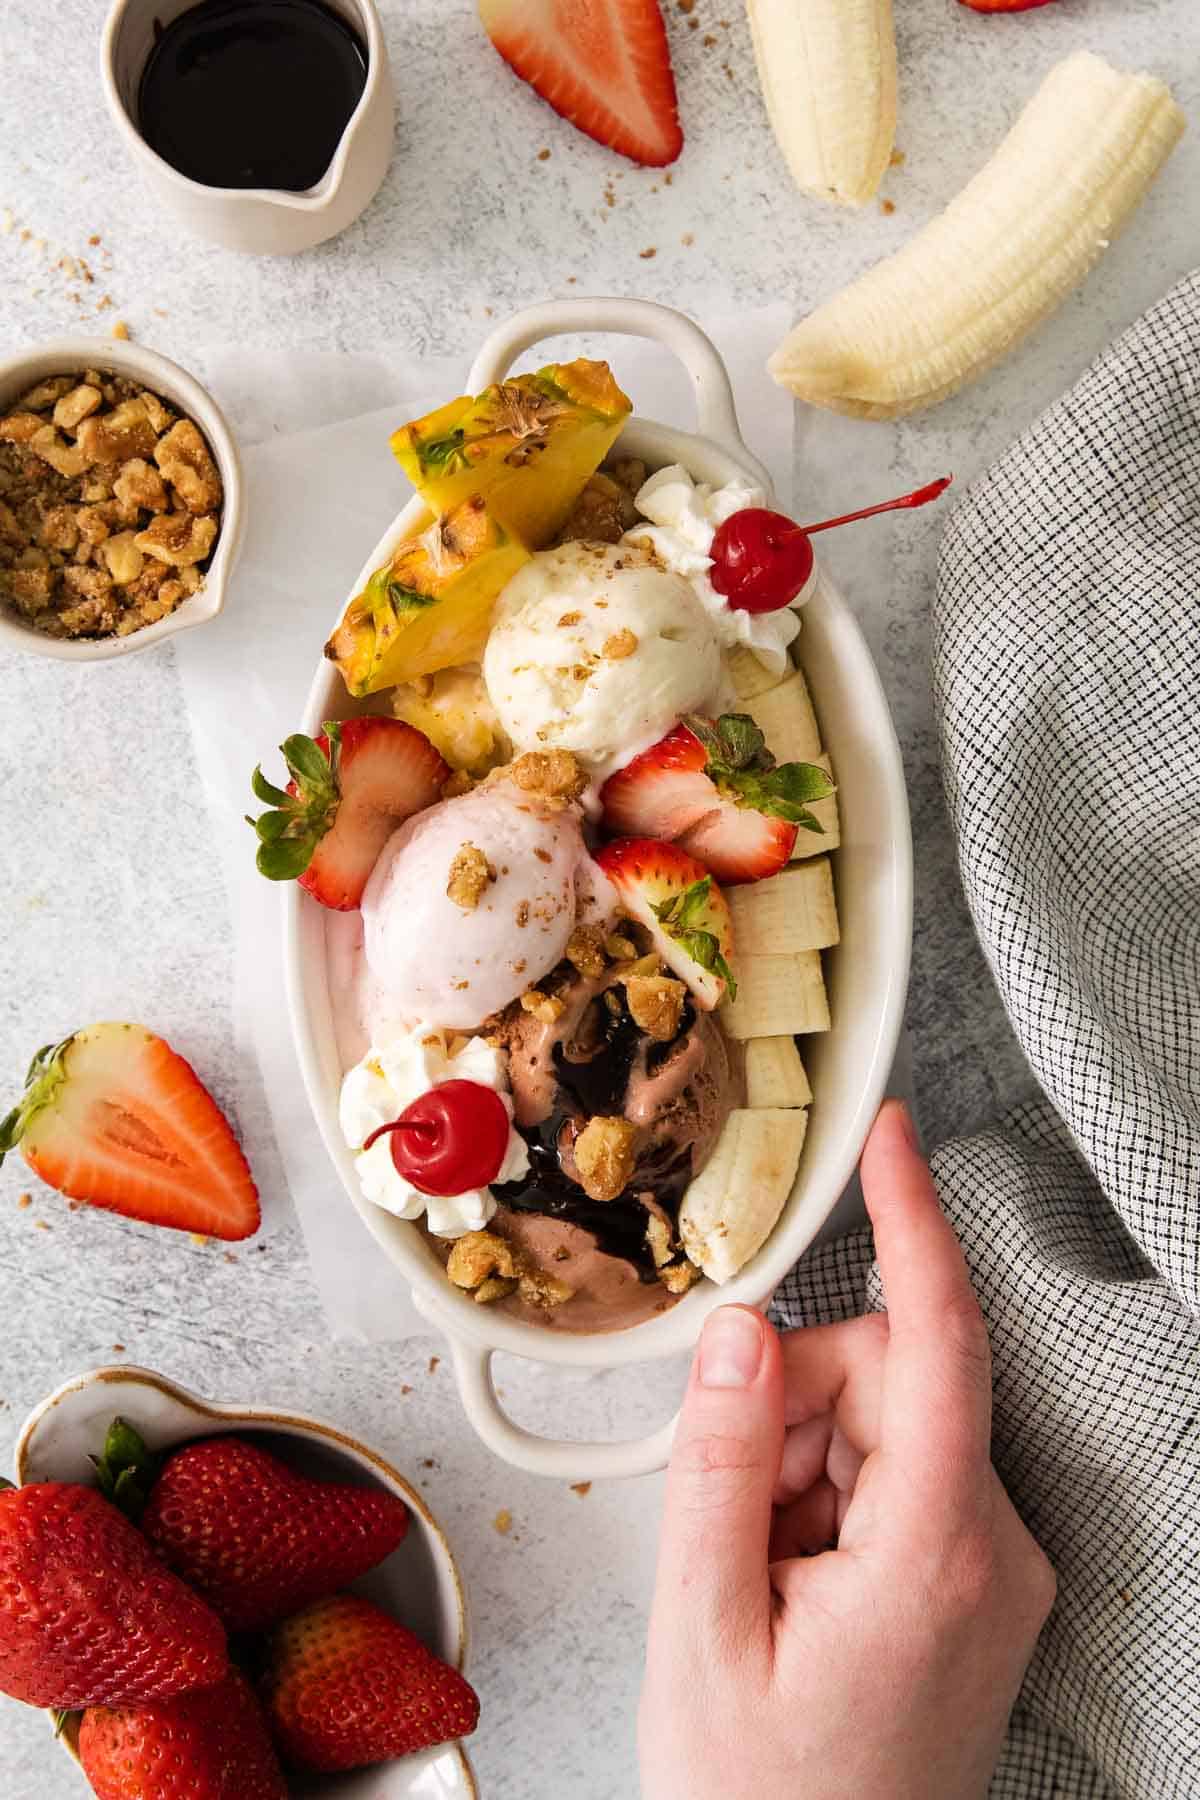 Banana split in a dish with a hand touching the dish